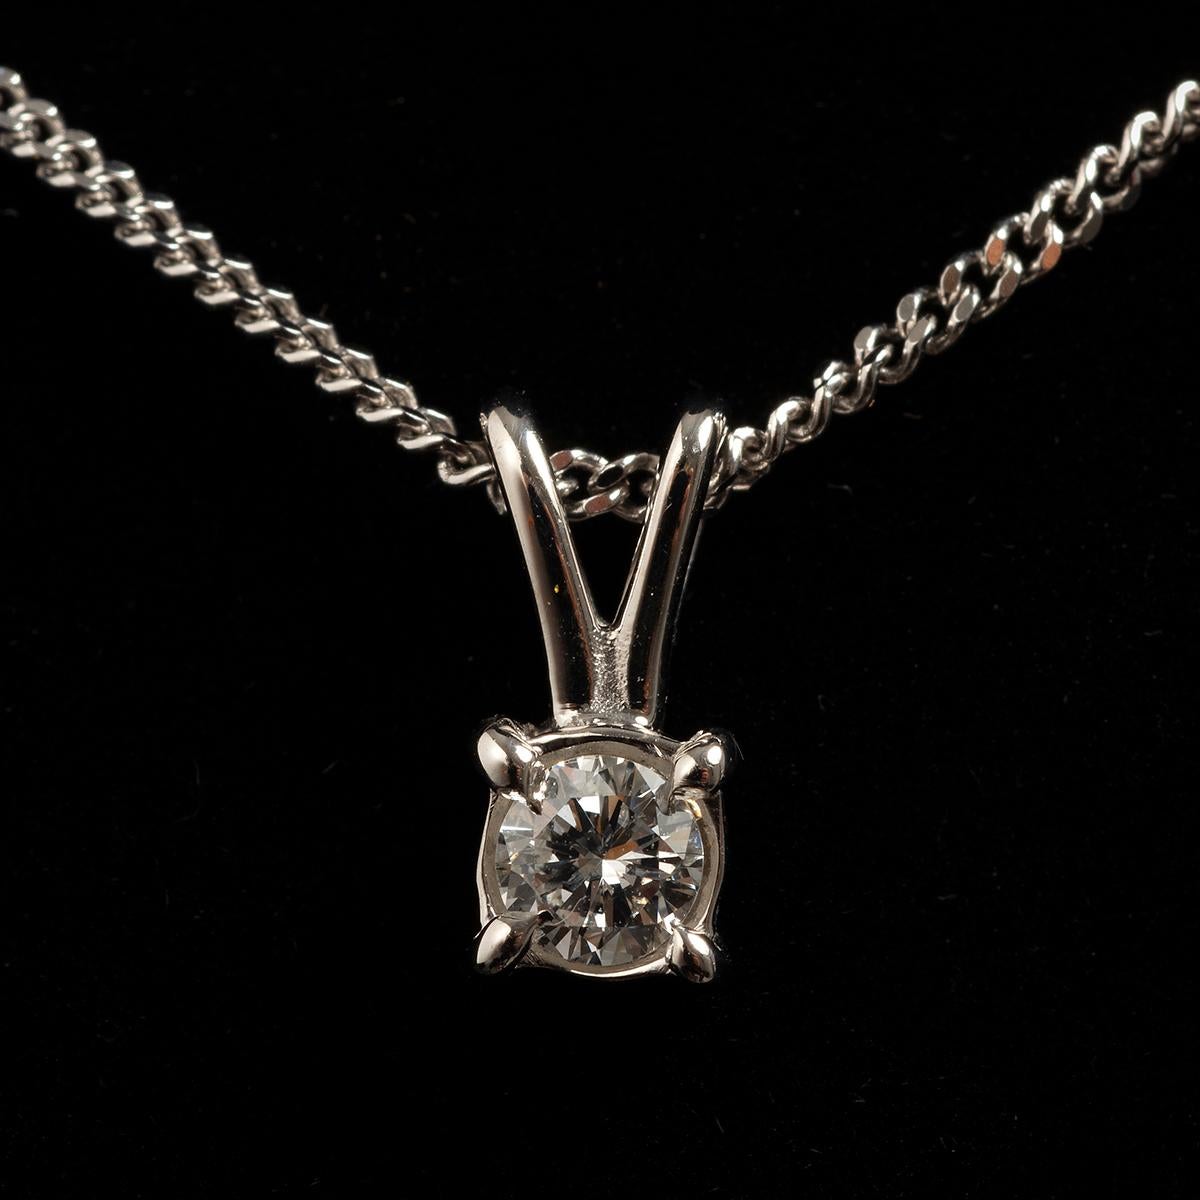 Our lovely diamond pendant and chain of 9k white gold features a solitaire diamond of est. .25ct